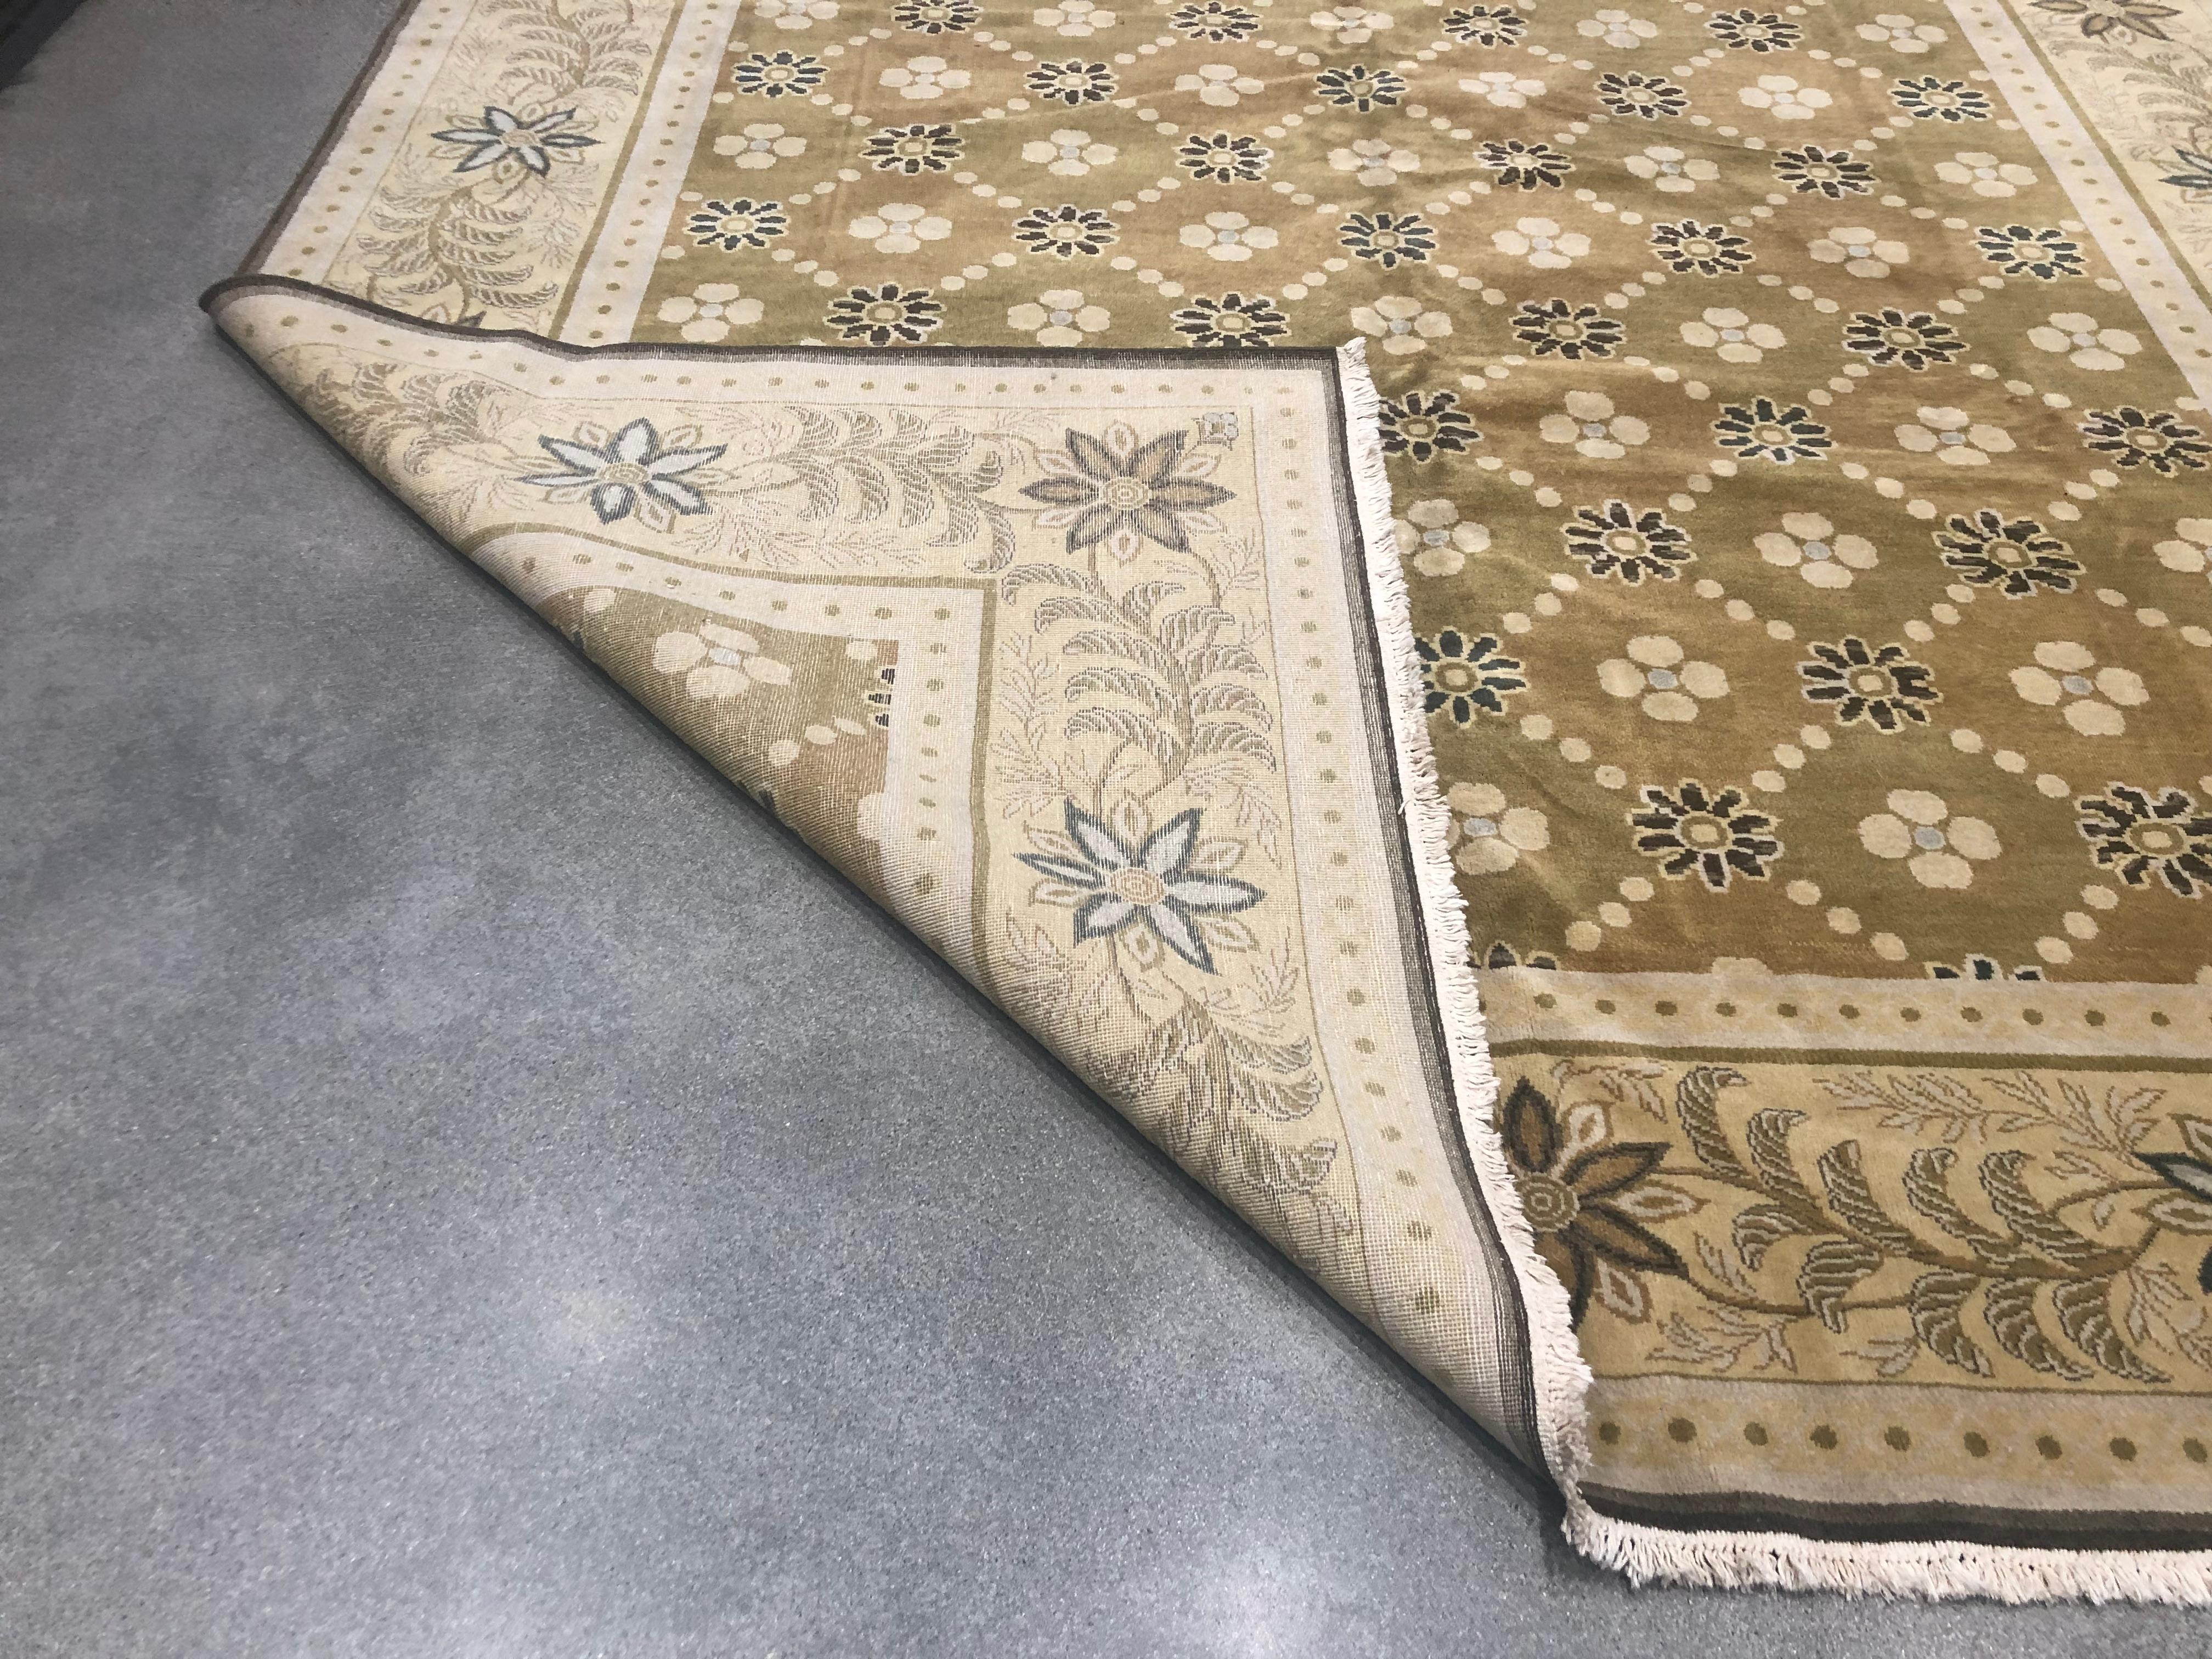 Traditional and modern styles come together in a creative way in this charming area rug. Colorful blossoms burst from the beige border that surrounds a golden core. The stylized floral grid with black and beige creates a tile-like look in the plush